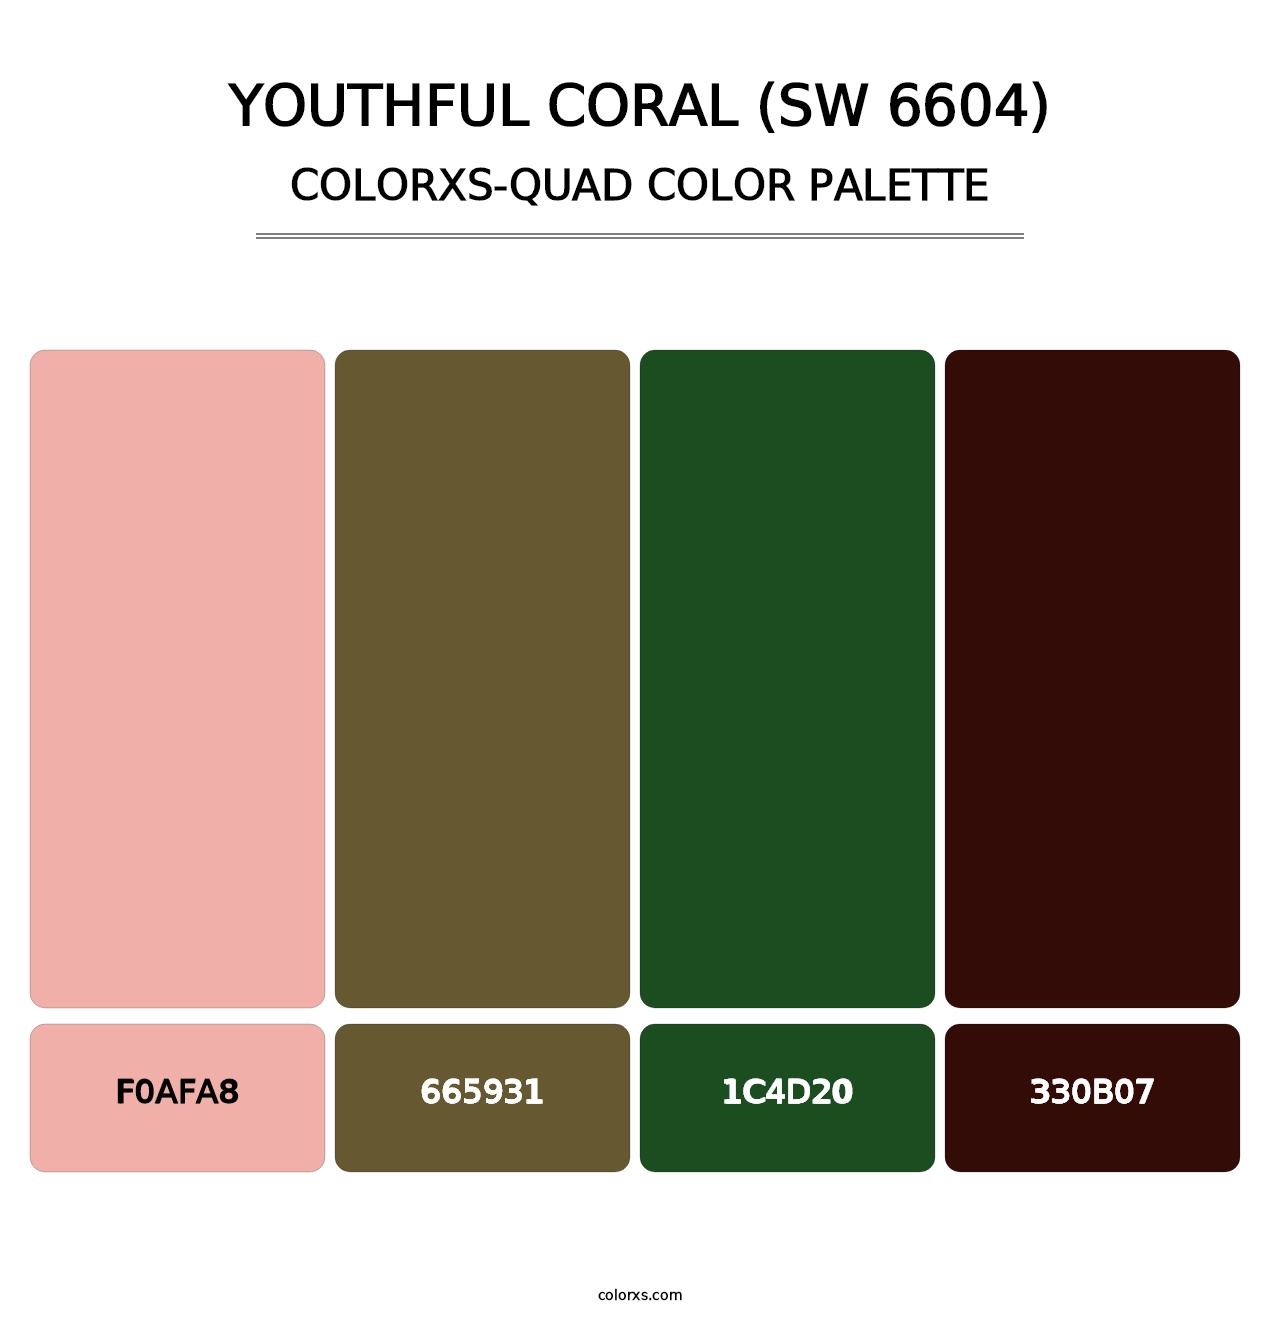 Youthful Coral (SW 6604) - Colorxs Quad Palette